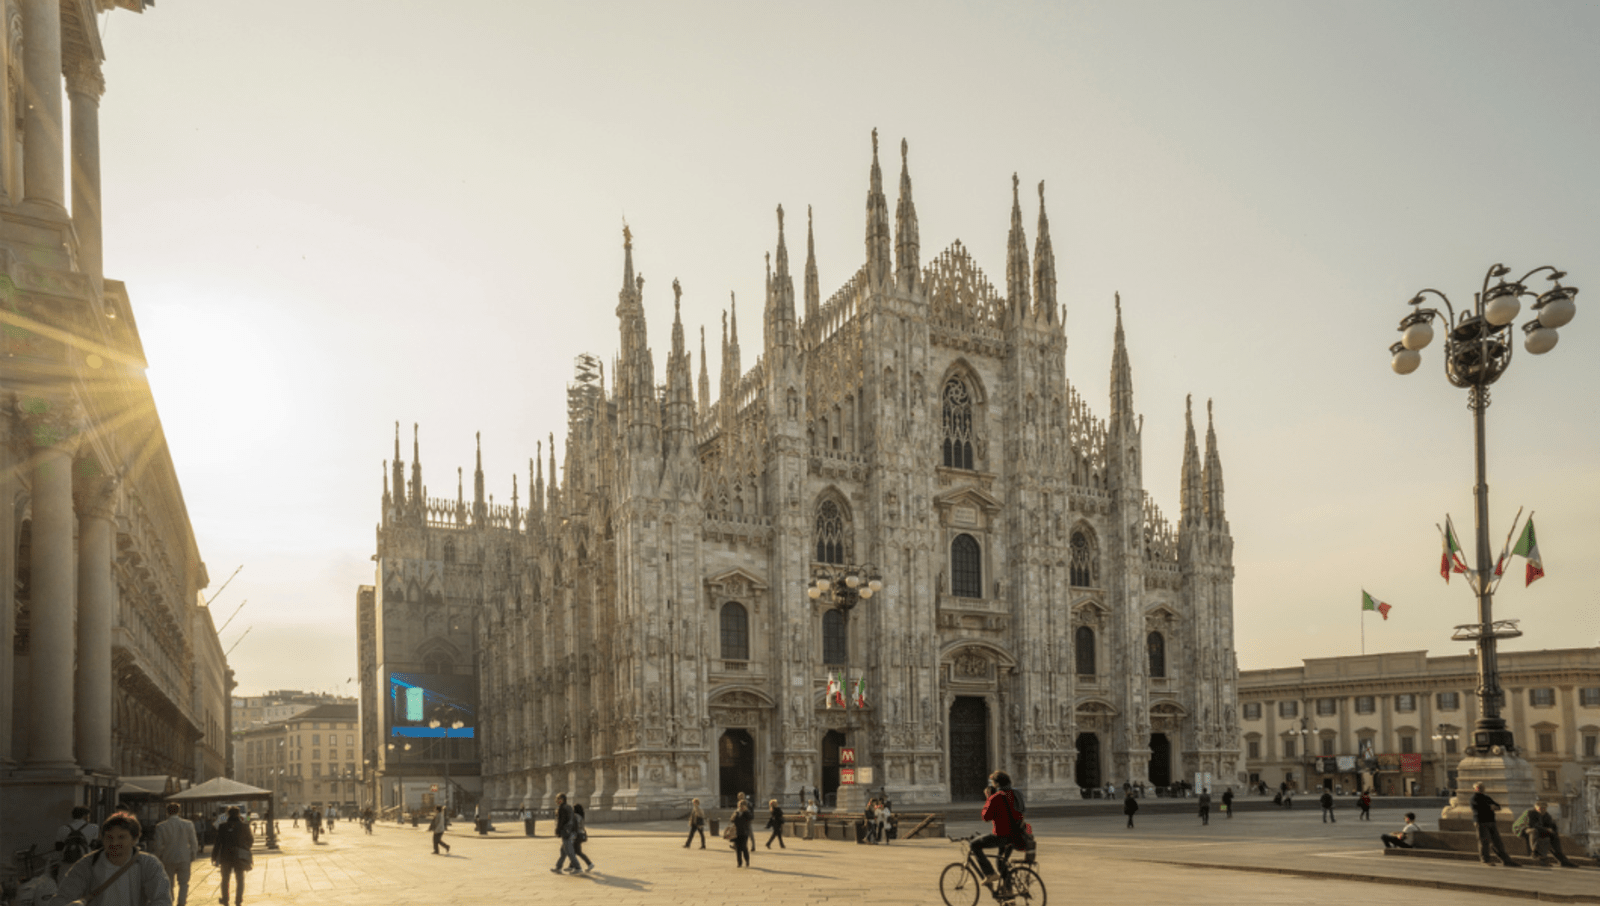 Large cathedral in a square with sun shining behind in Milan